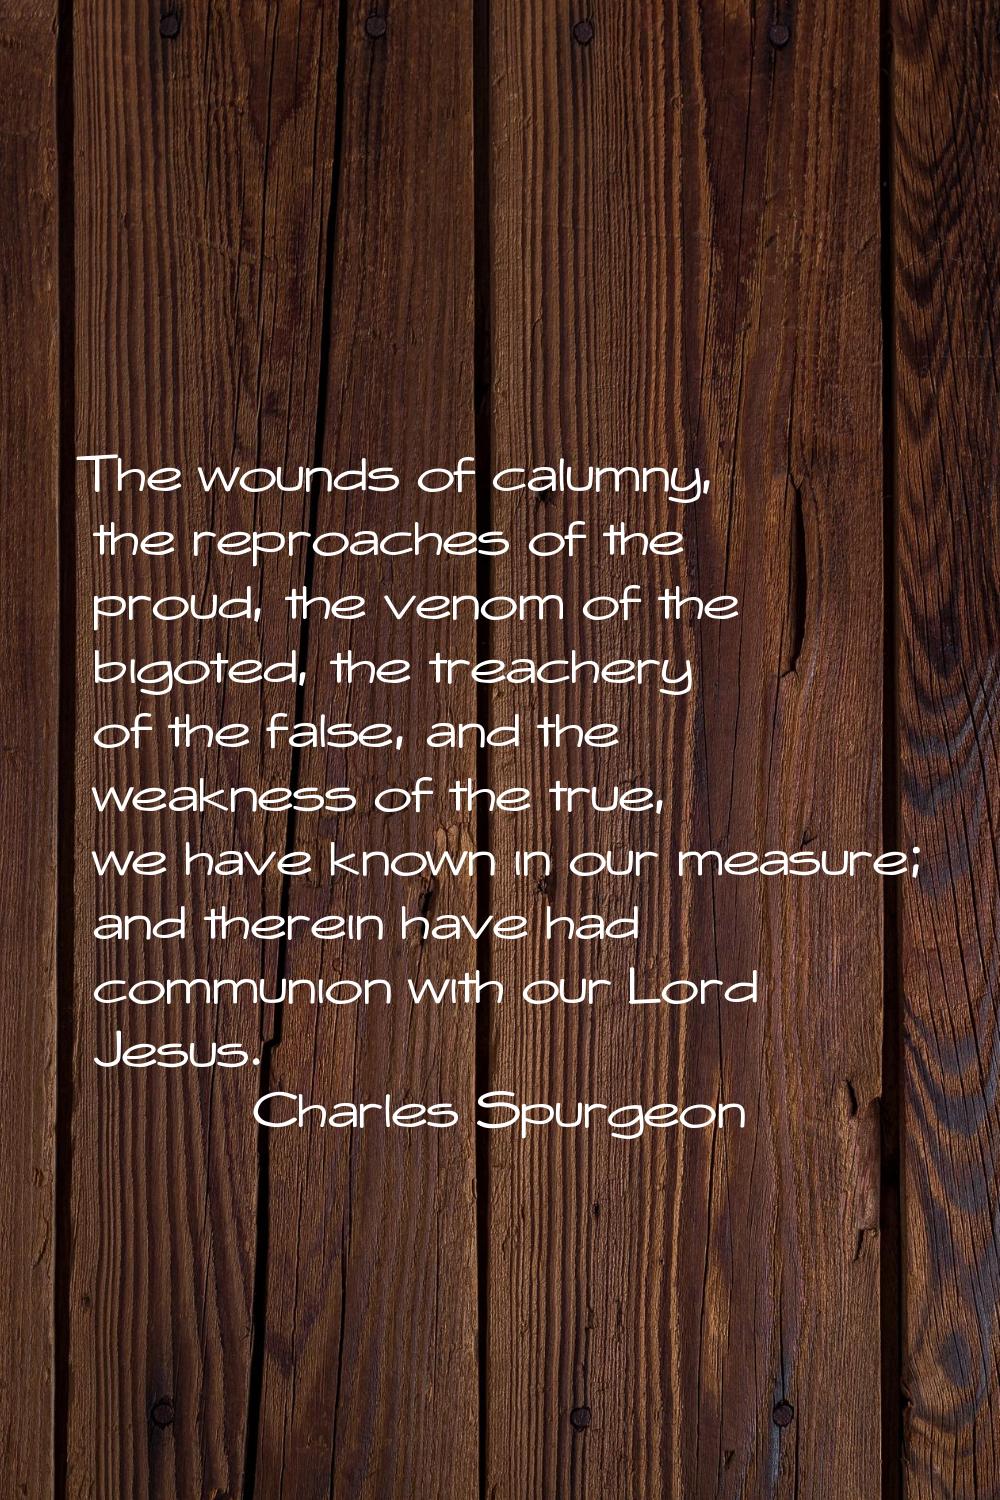 The wounds of calumny, the reproaches of the proud, the venom of the bigoted, the treachery of the 